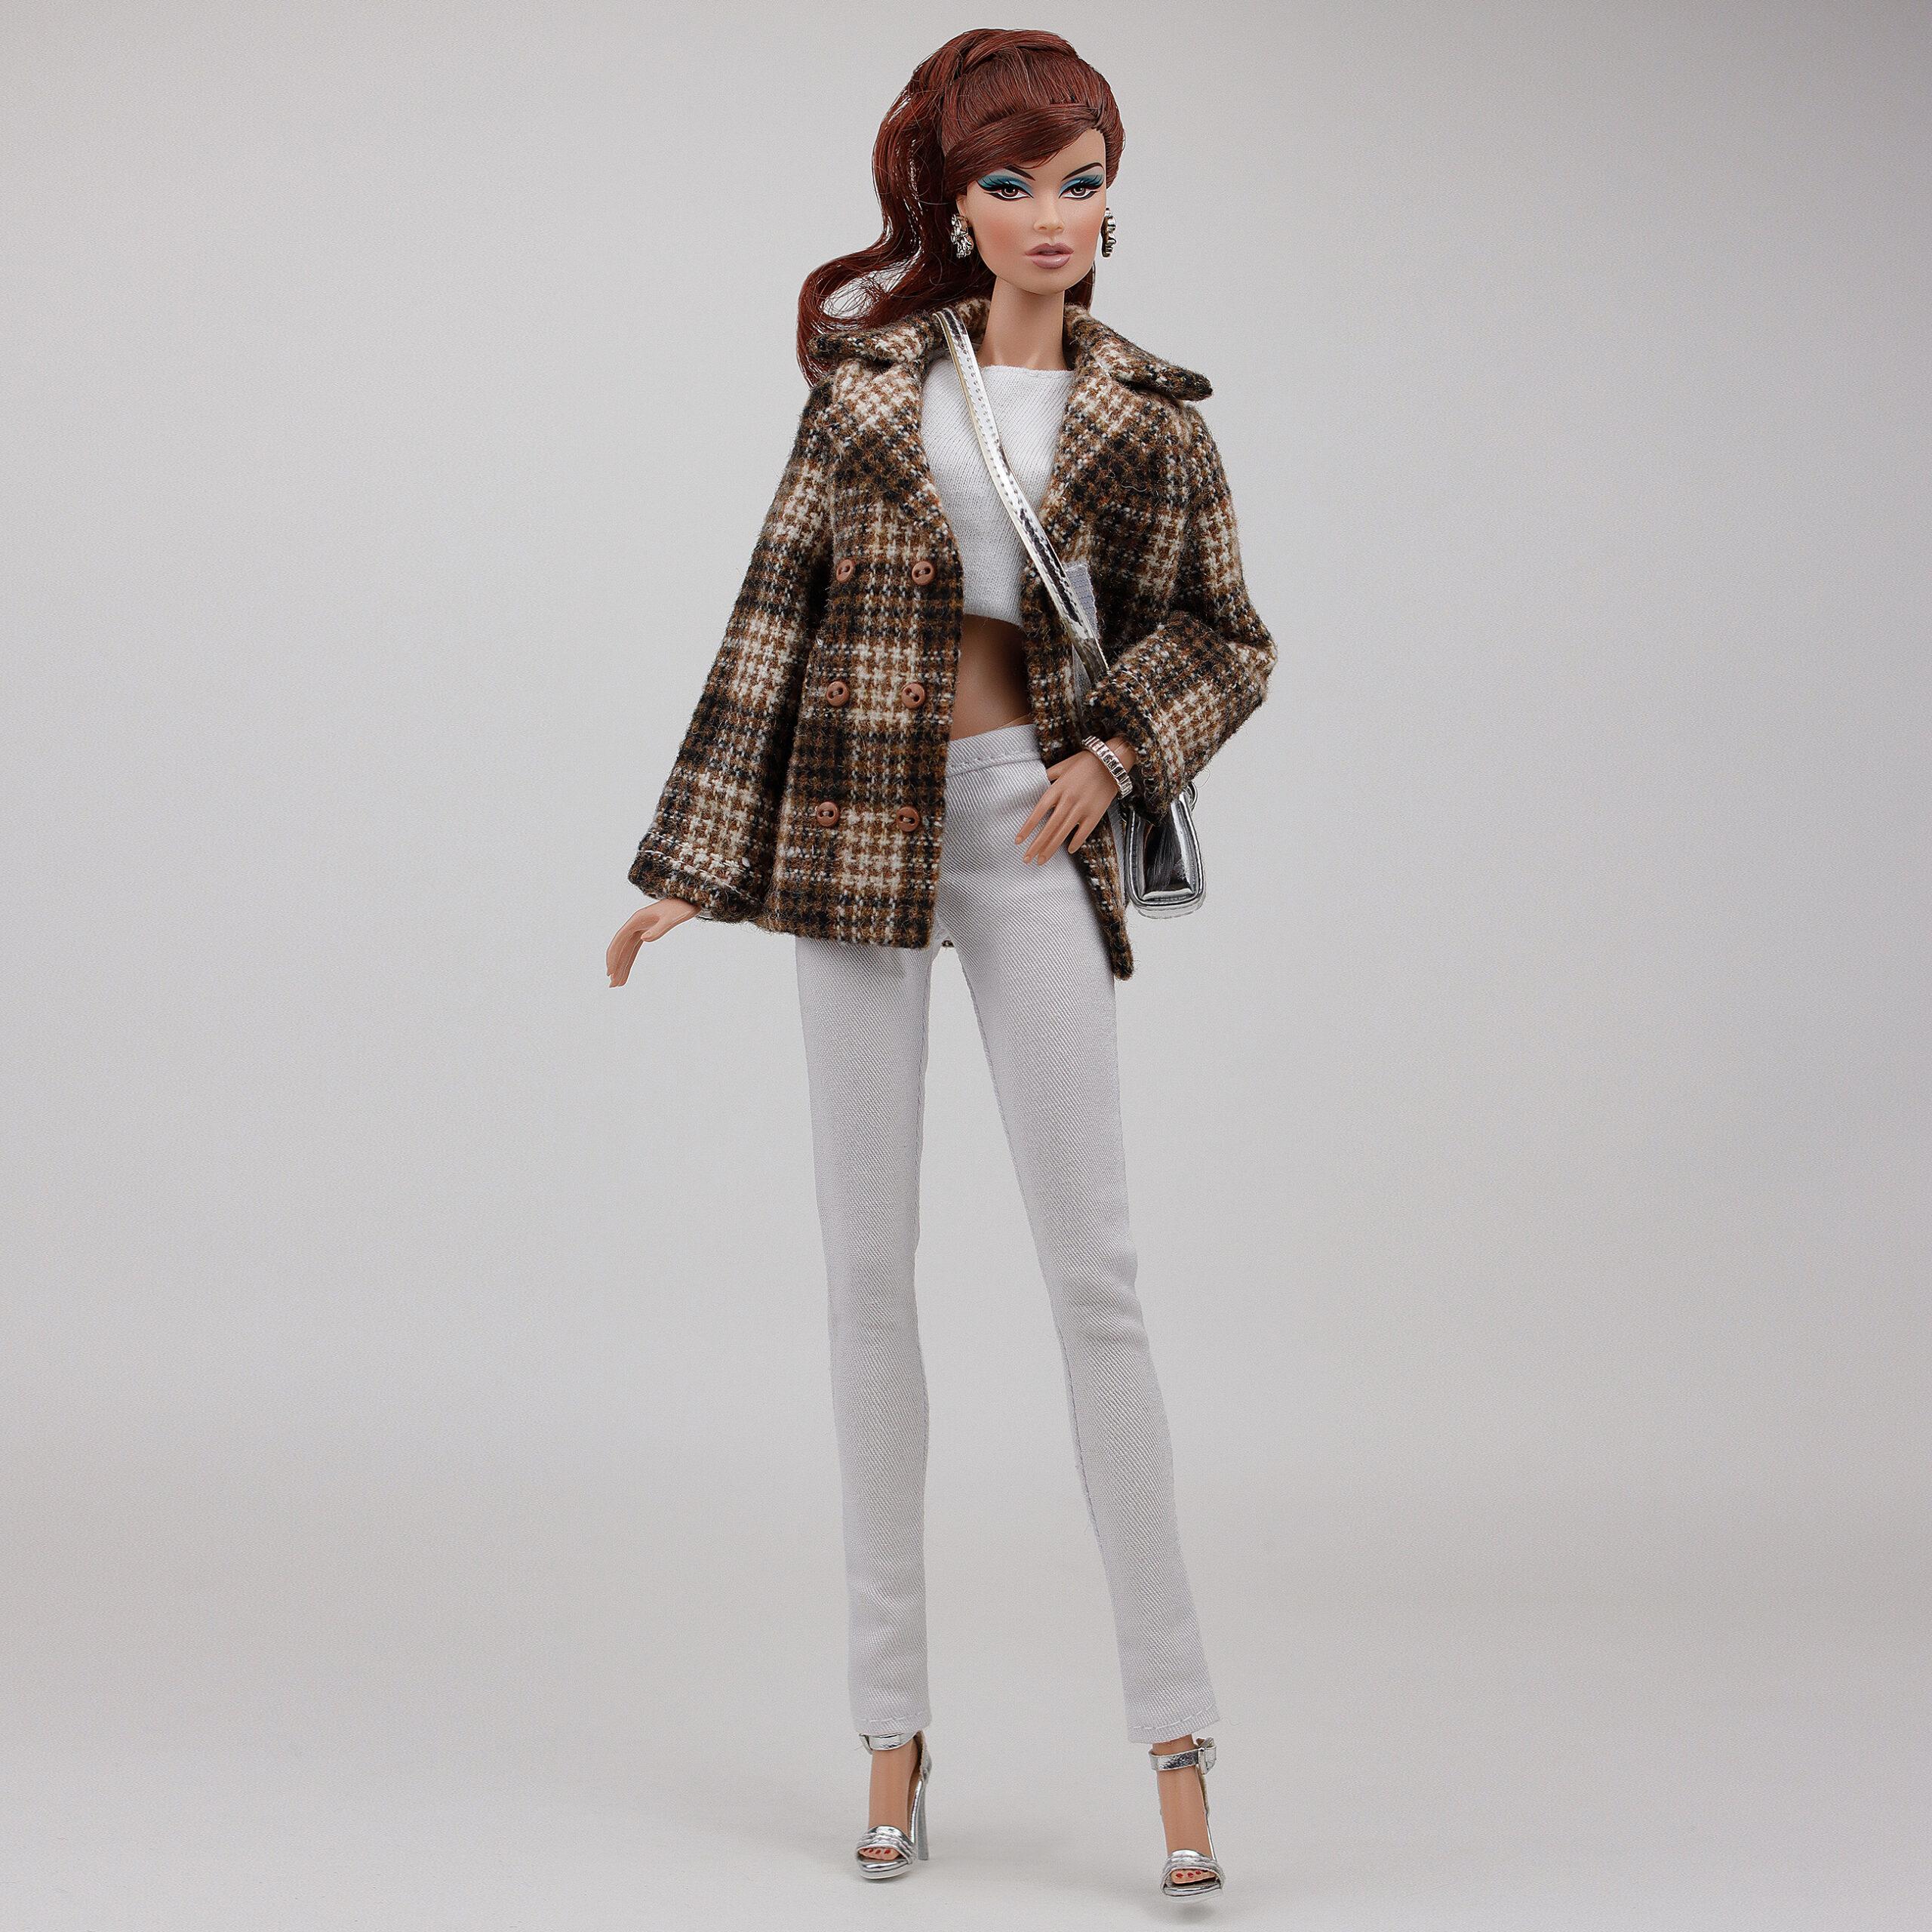 FA-043 Brown plaid peacoat for 11 1/2; Brb Pivotal Made-to-Move Poppy  Parker body dolls and similar size dolls 11 1/2; Brb clothes